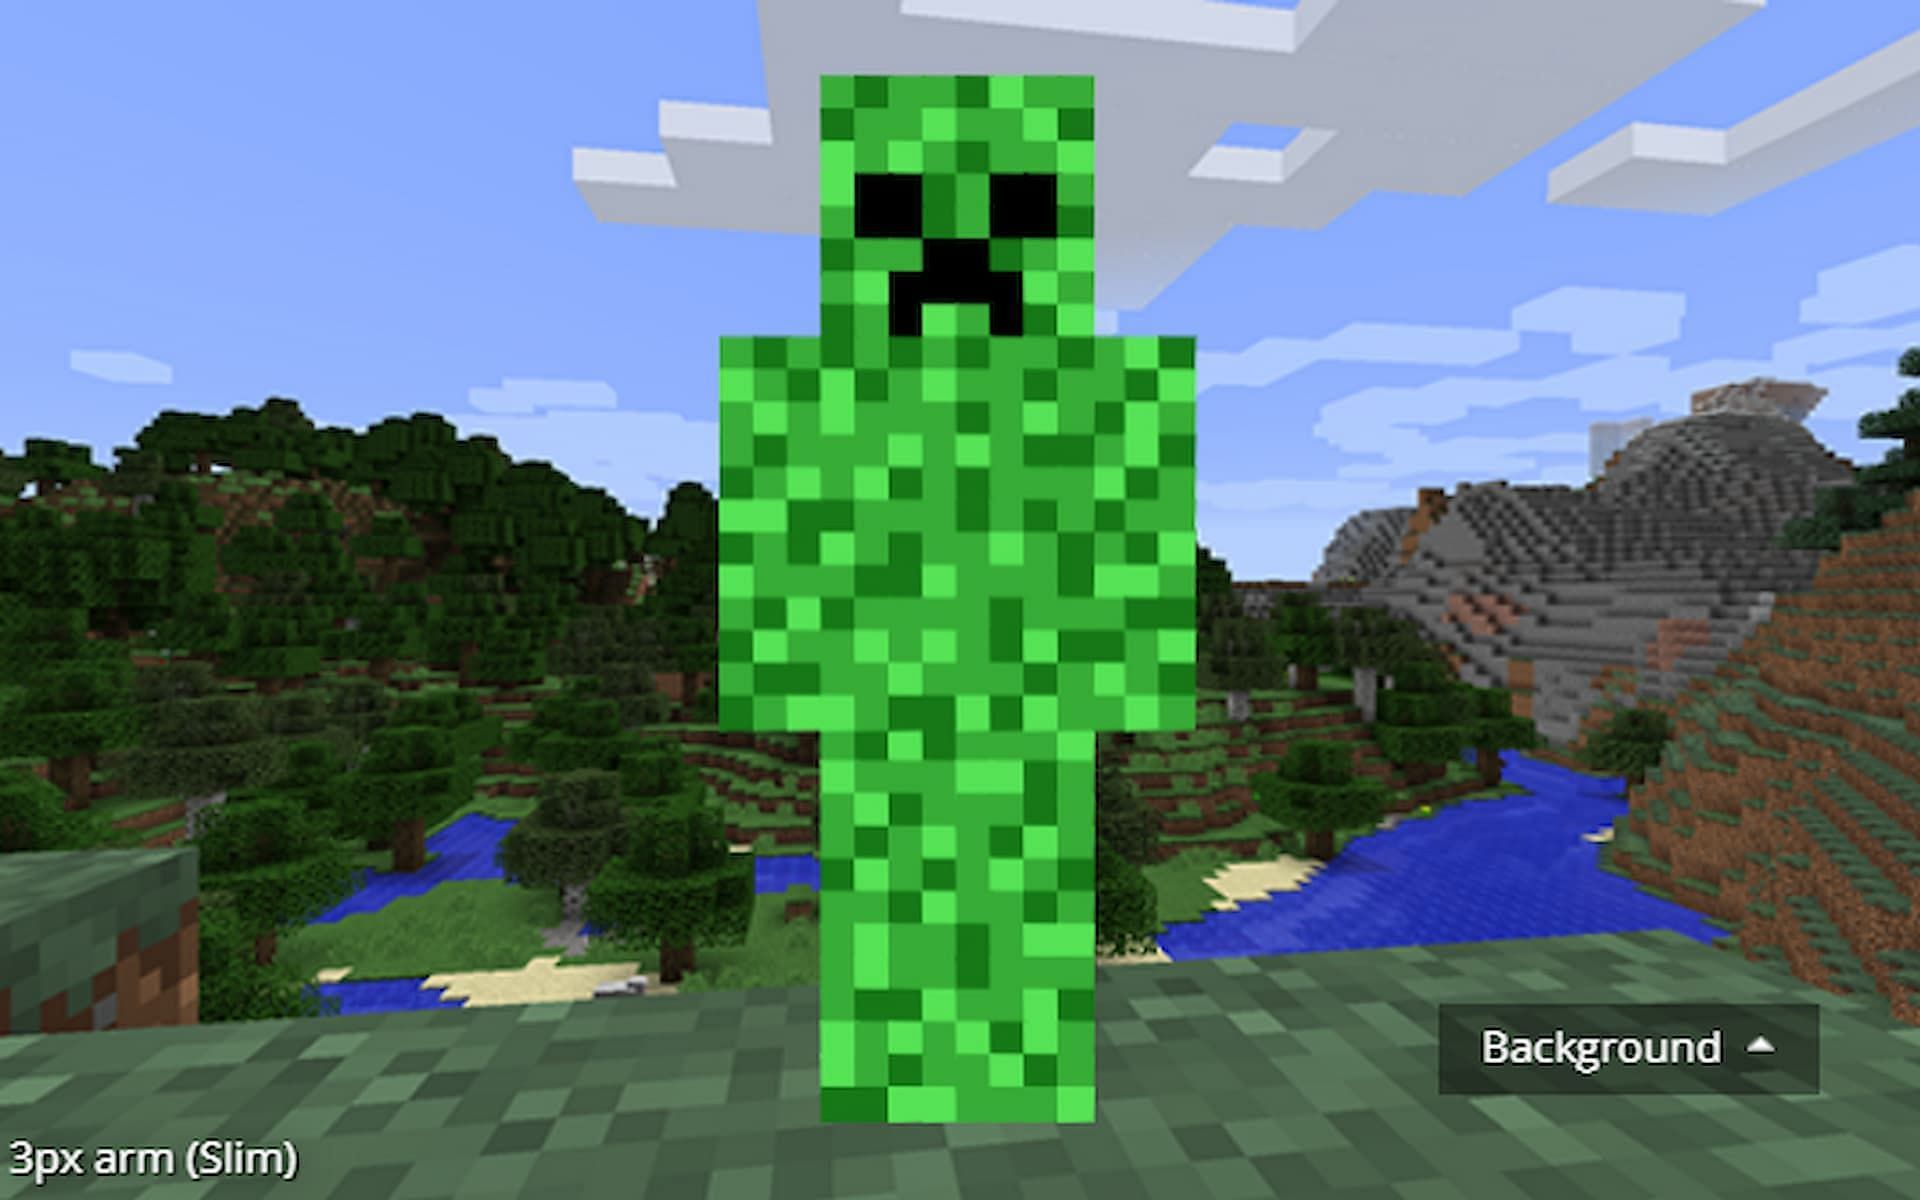 Players can show off their love for the Creeper mob with this great skin (Image via Minecraftskins.com)